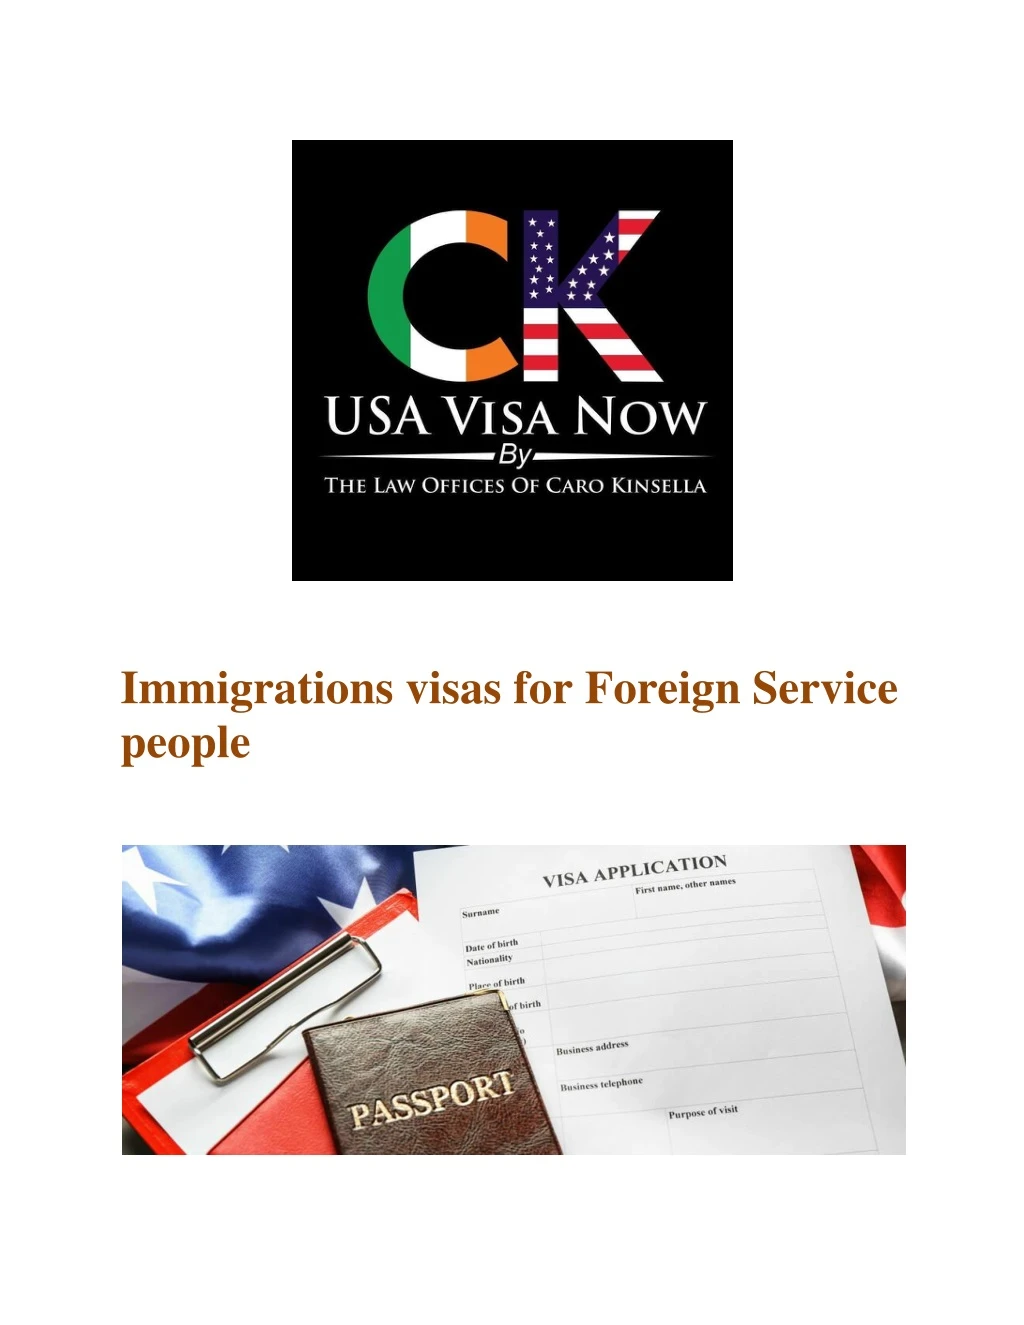 immigrations visas for foreign service people